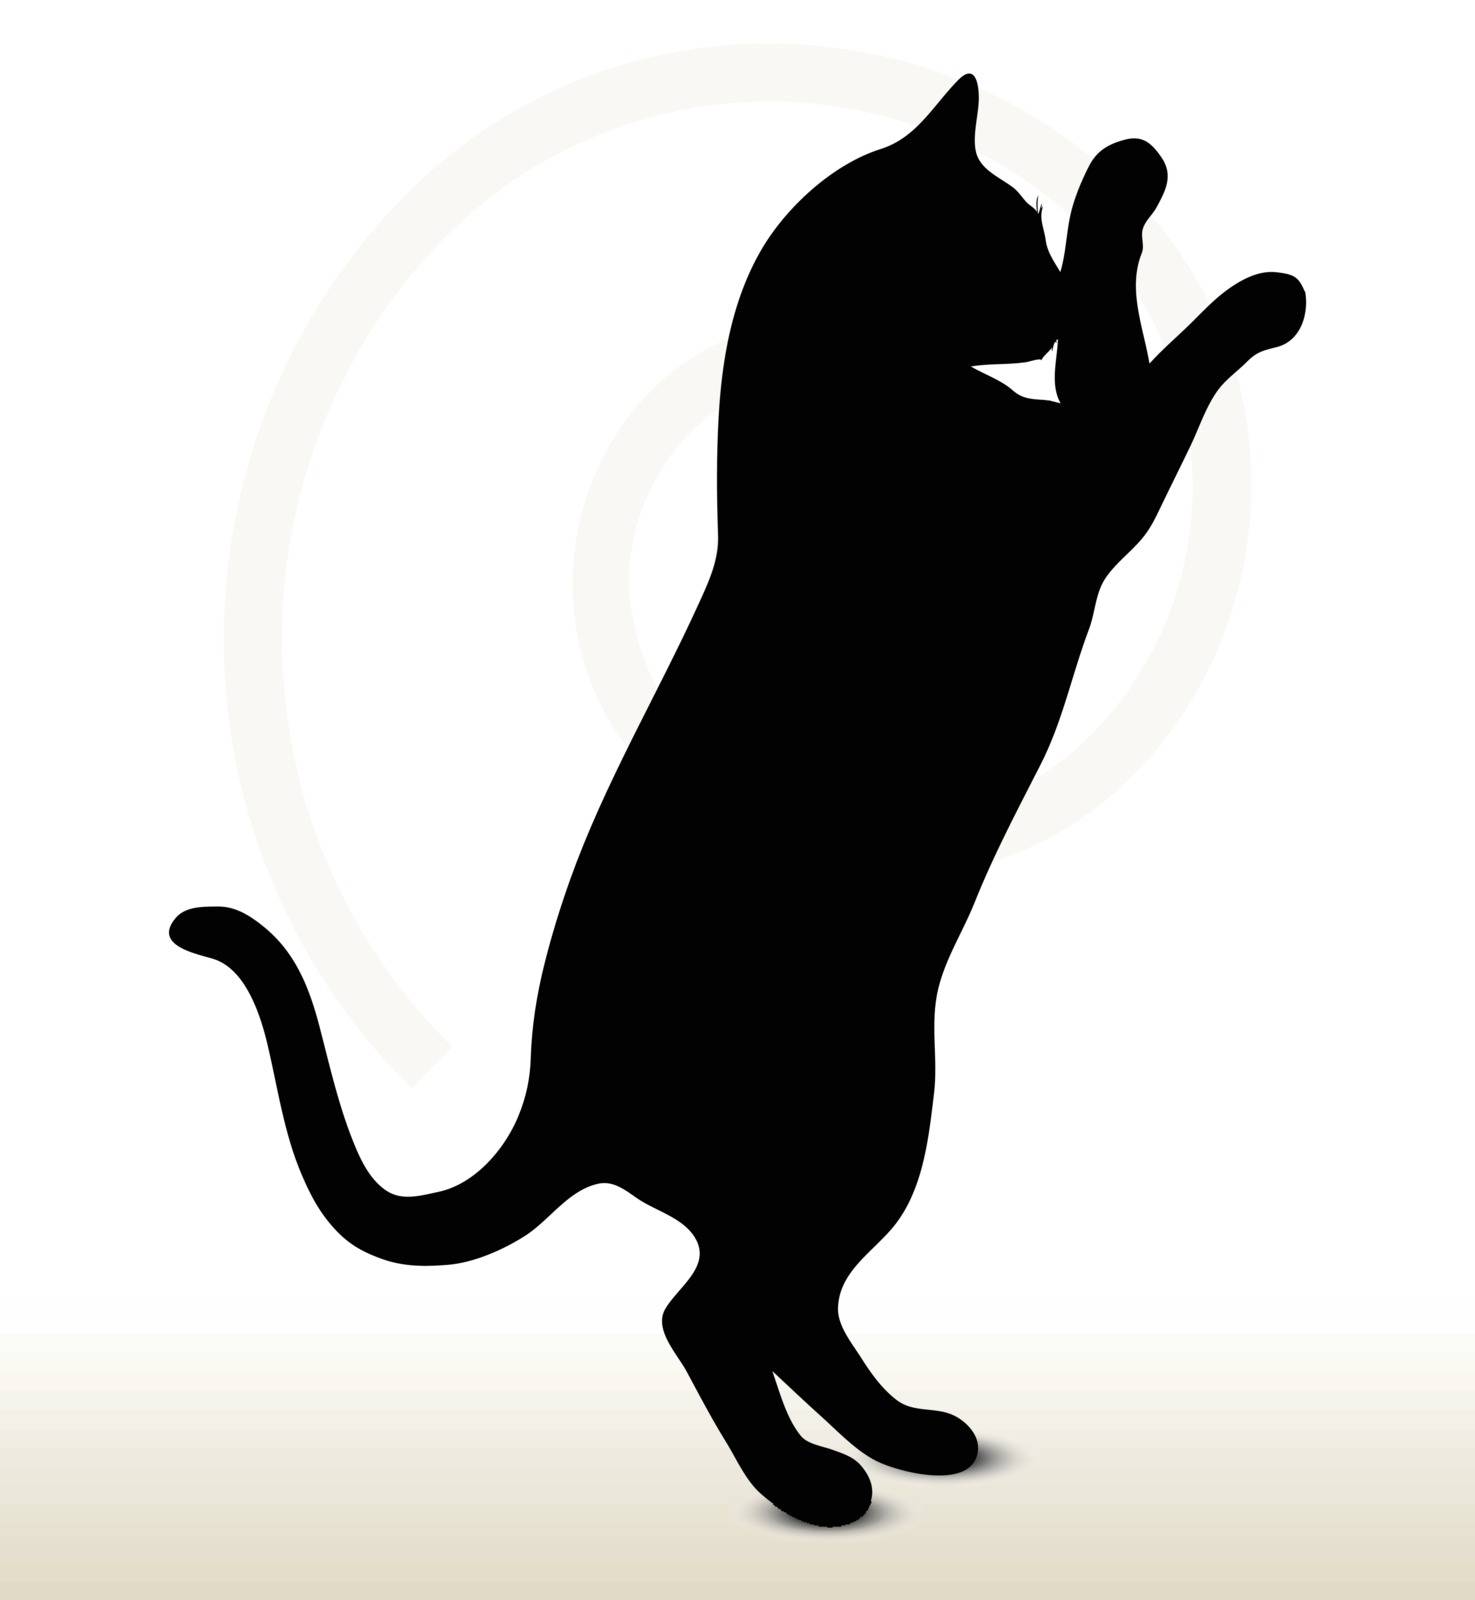 illustration of cat silhouette isolated on white background - in boxing pose